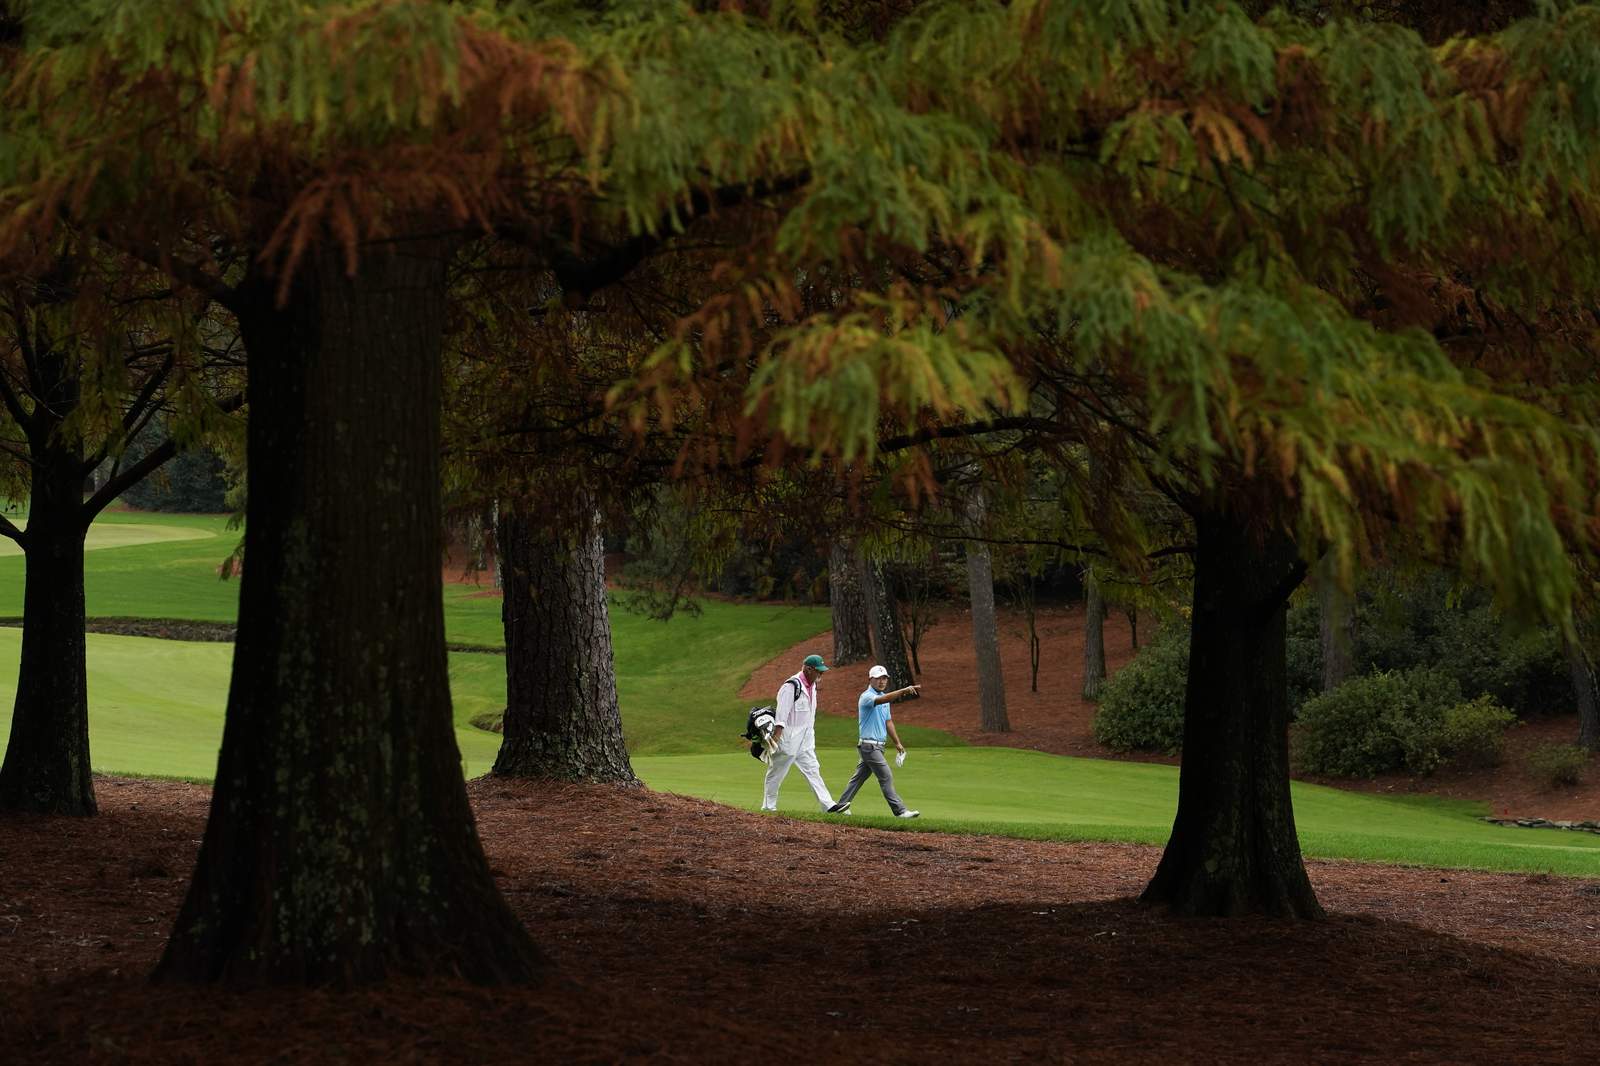 The Masters in November gives golf a big sendoff